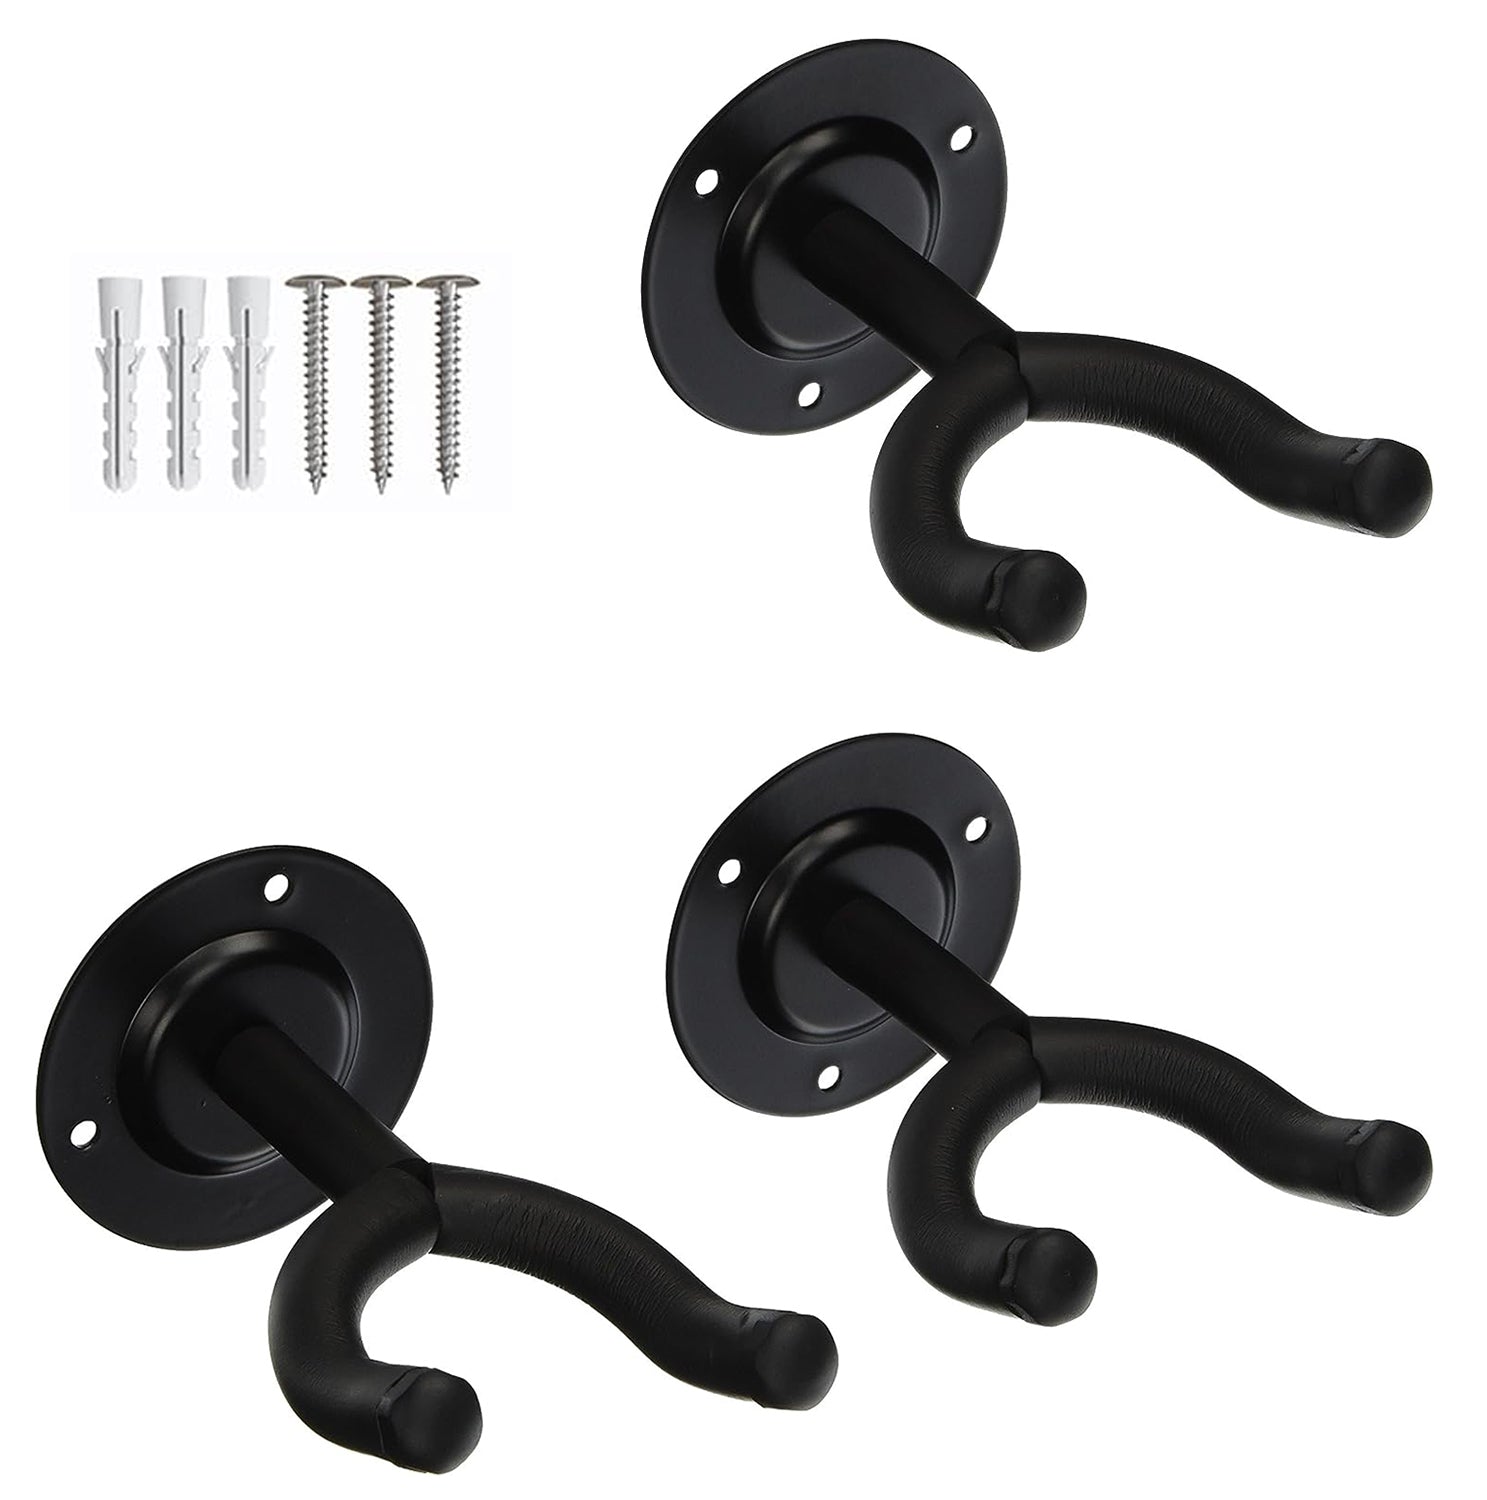 5 Core Guitar Wall Mount, Black Guitar Wall Hanger| 3 Pieces Guitar Hanger| V-Shaped Secure and Sturdy Guitar Holder Wall Mount| Guitar Accessories for Acoustic, Electric, Bass Guitar, Mandolin- GH ST 3PCS